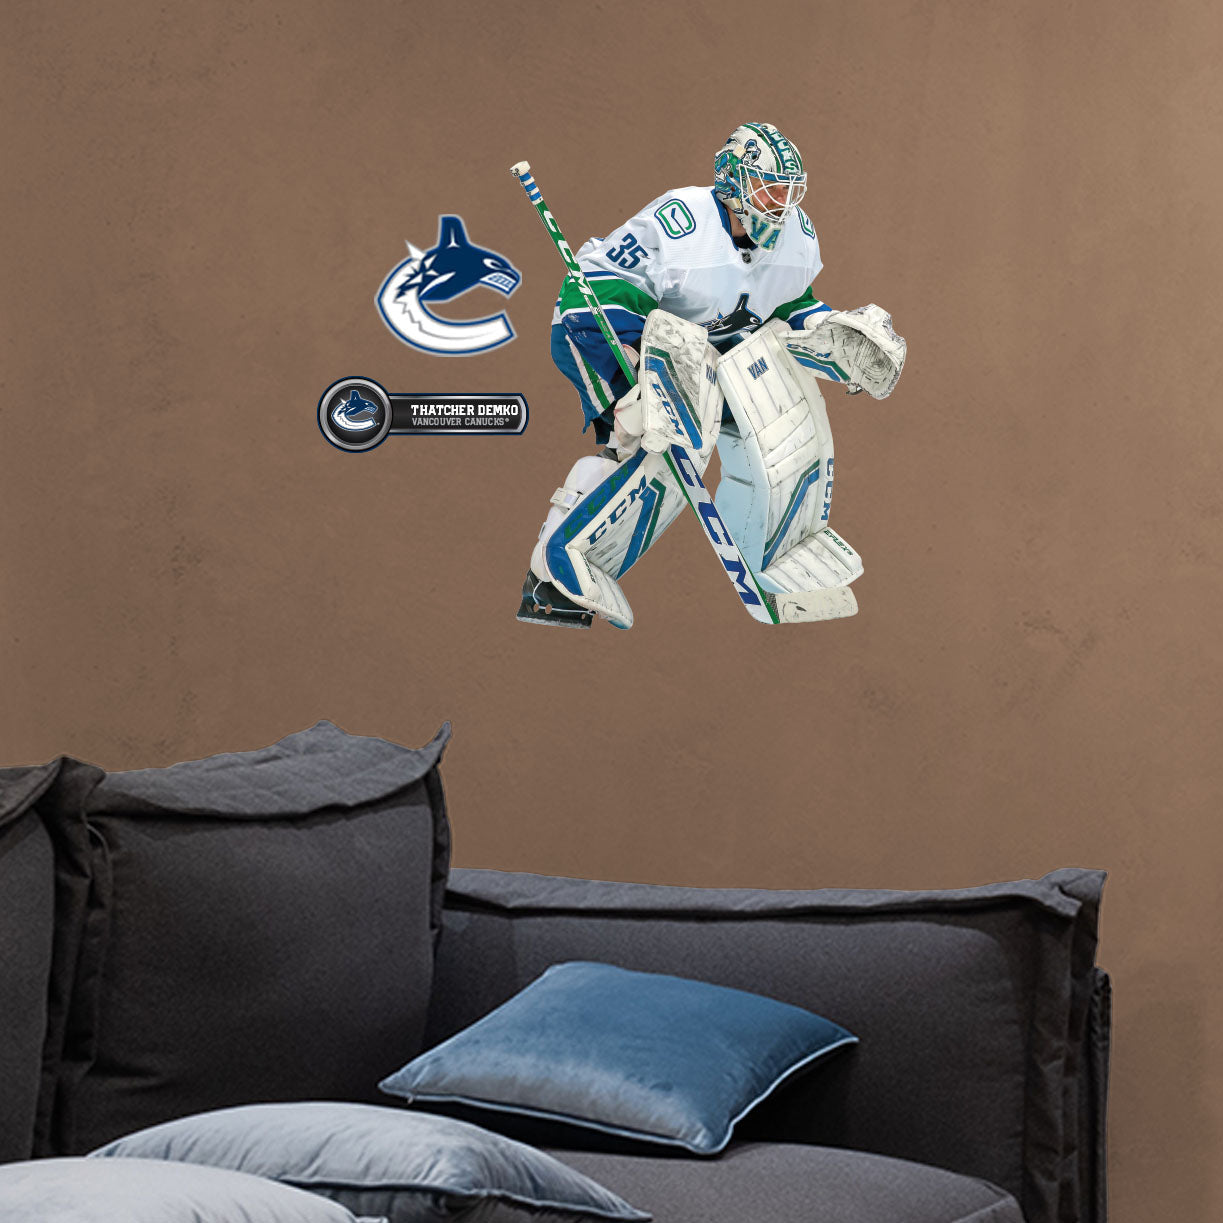 Vancouver Canucks: Thatcher Demko - Officially Licensed NHL Removable Adhesive Decal